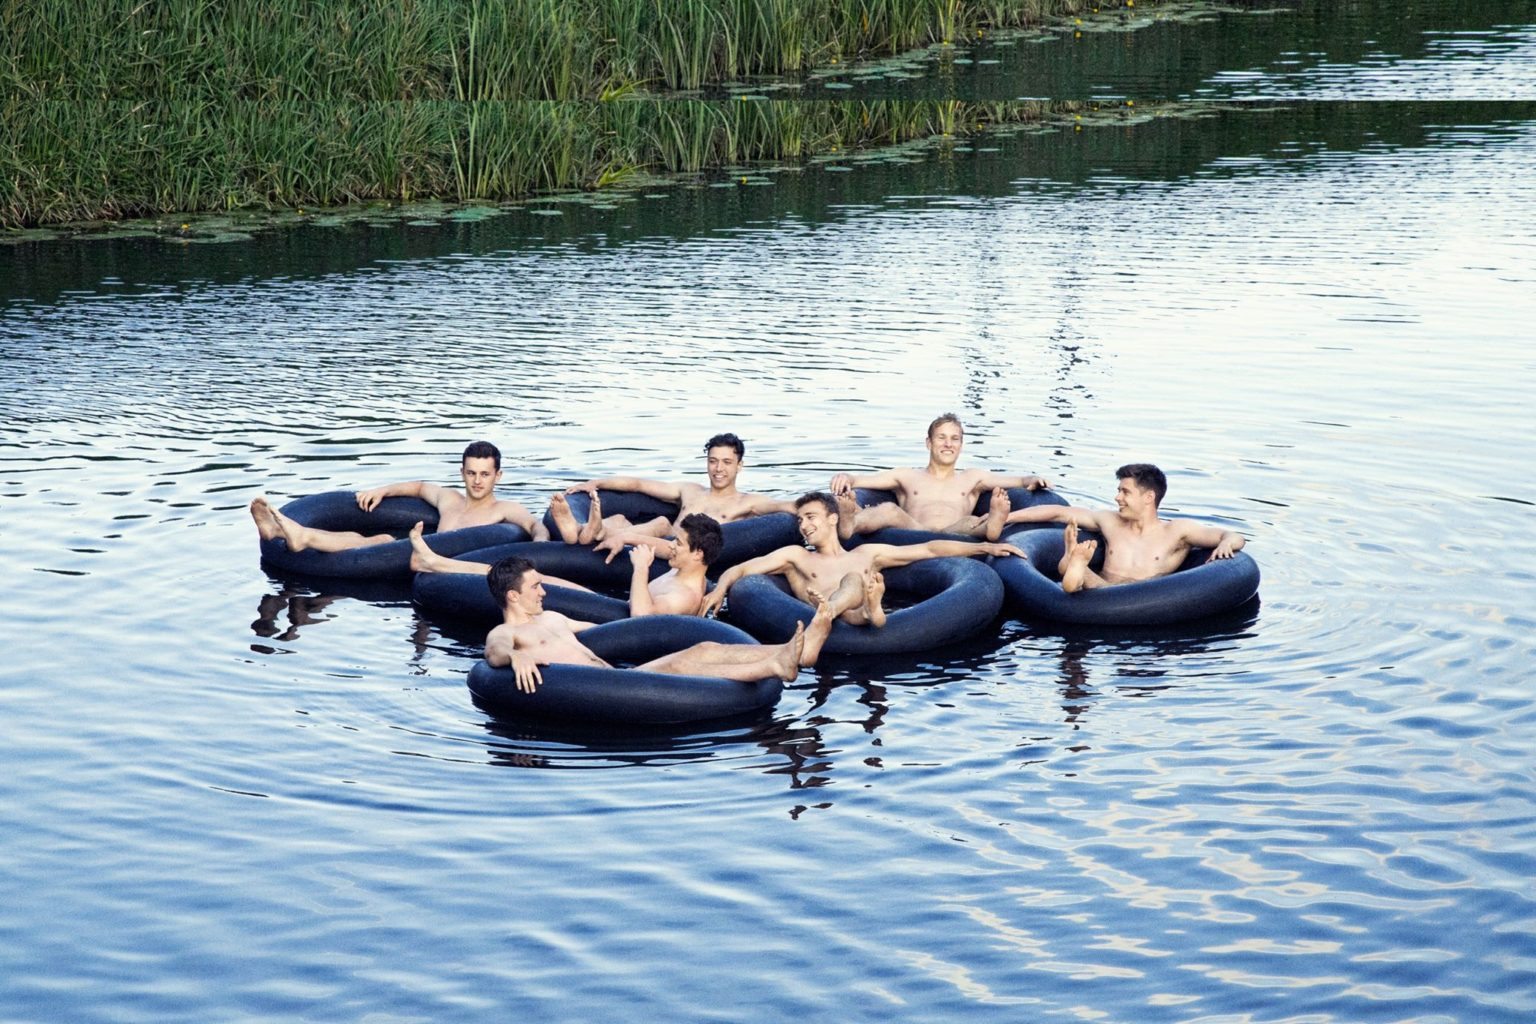 The Warwick Rowers uncovered The Boar